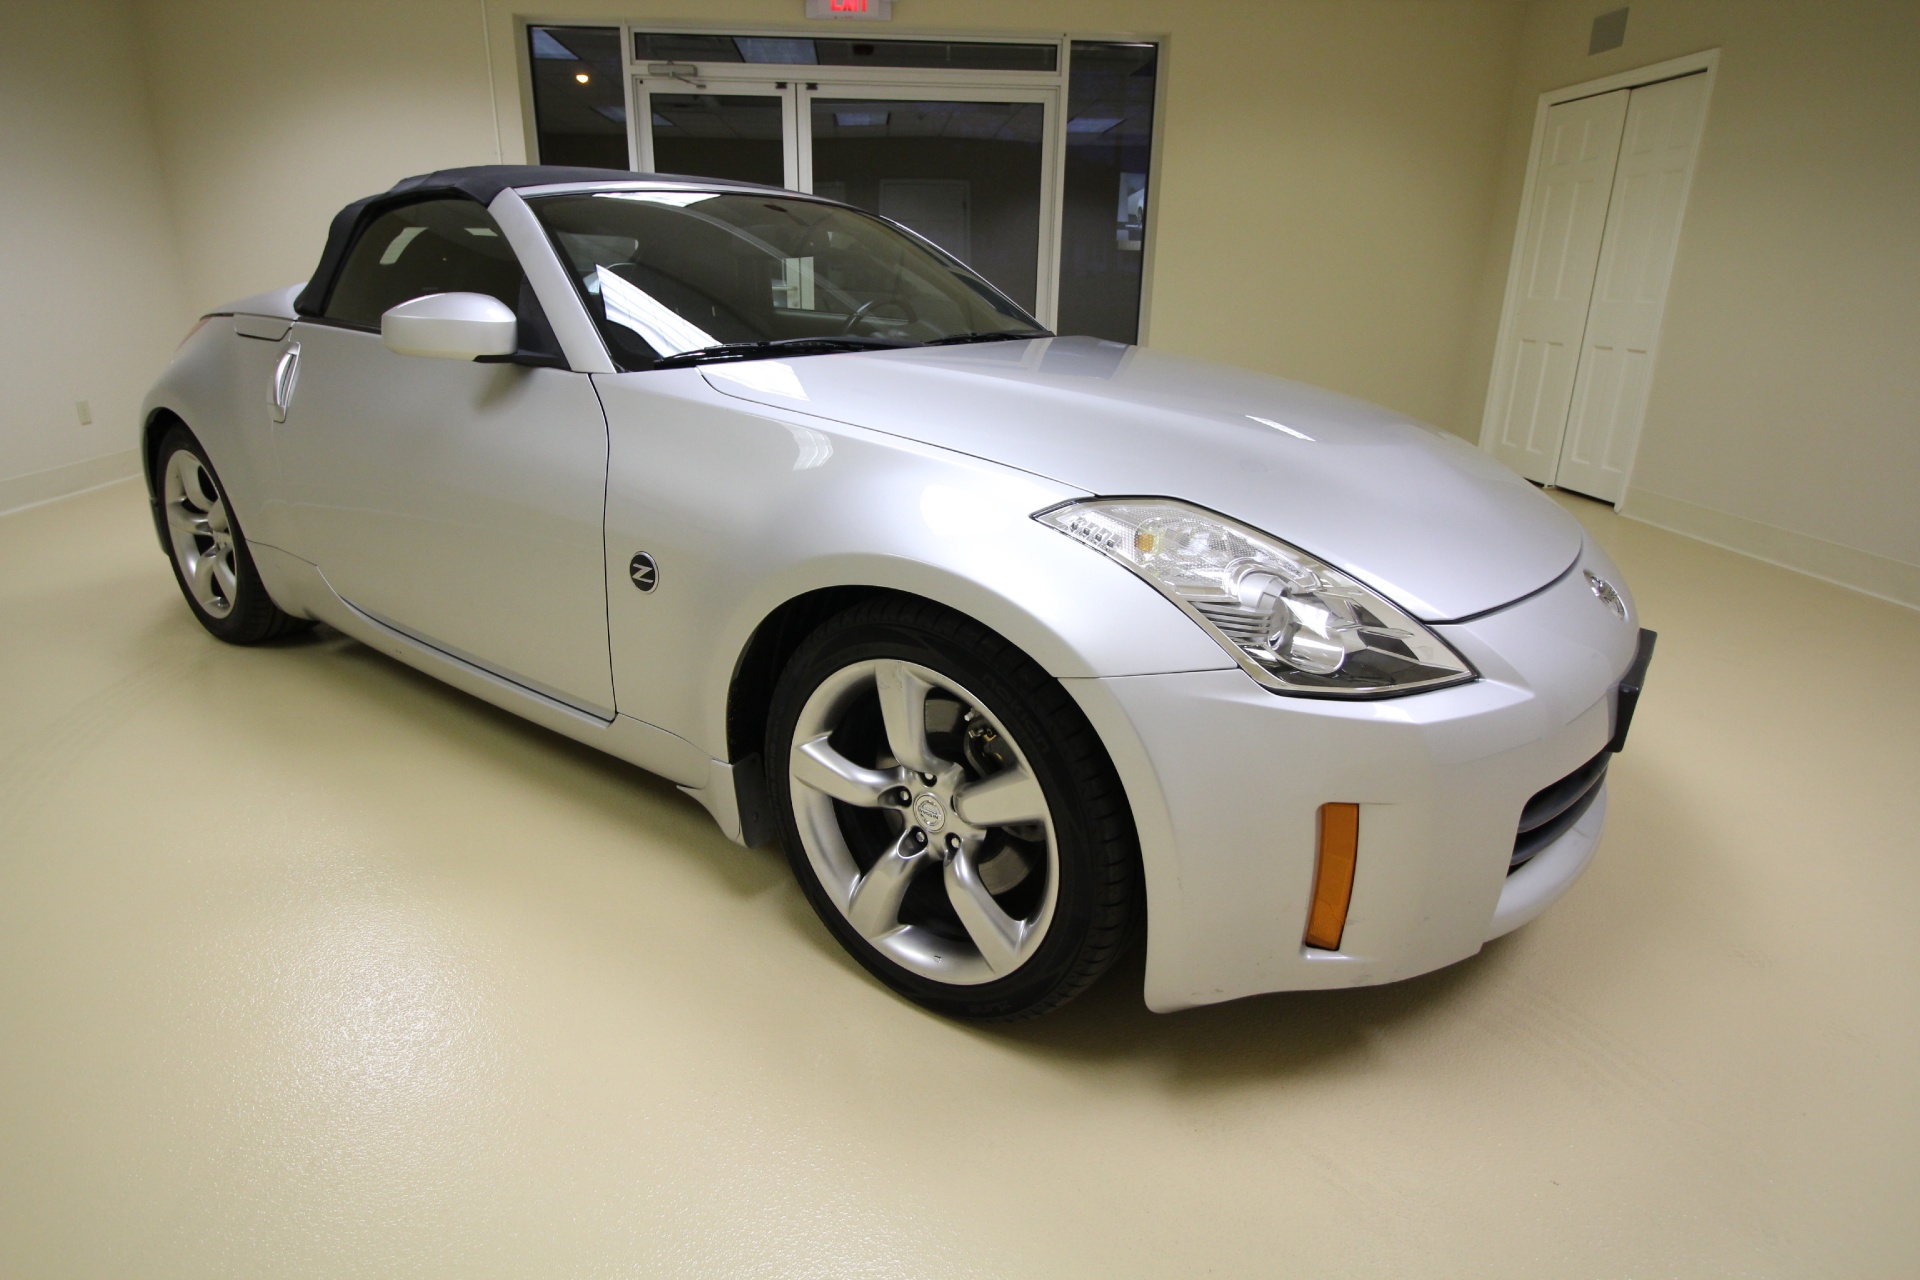 Used 2007 Silver Nissan 350Z Grand Touring Roadster SUPER CLEAN,LOW MILES,AUTOMATIC | Albany, NY